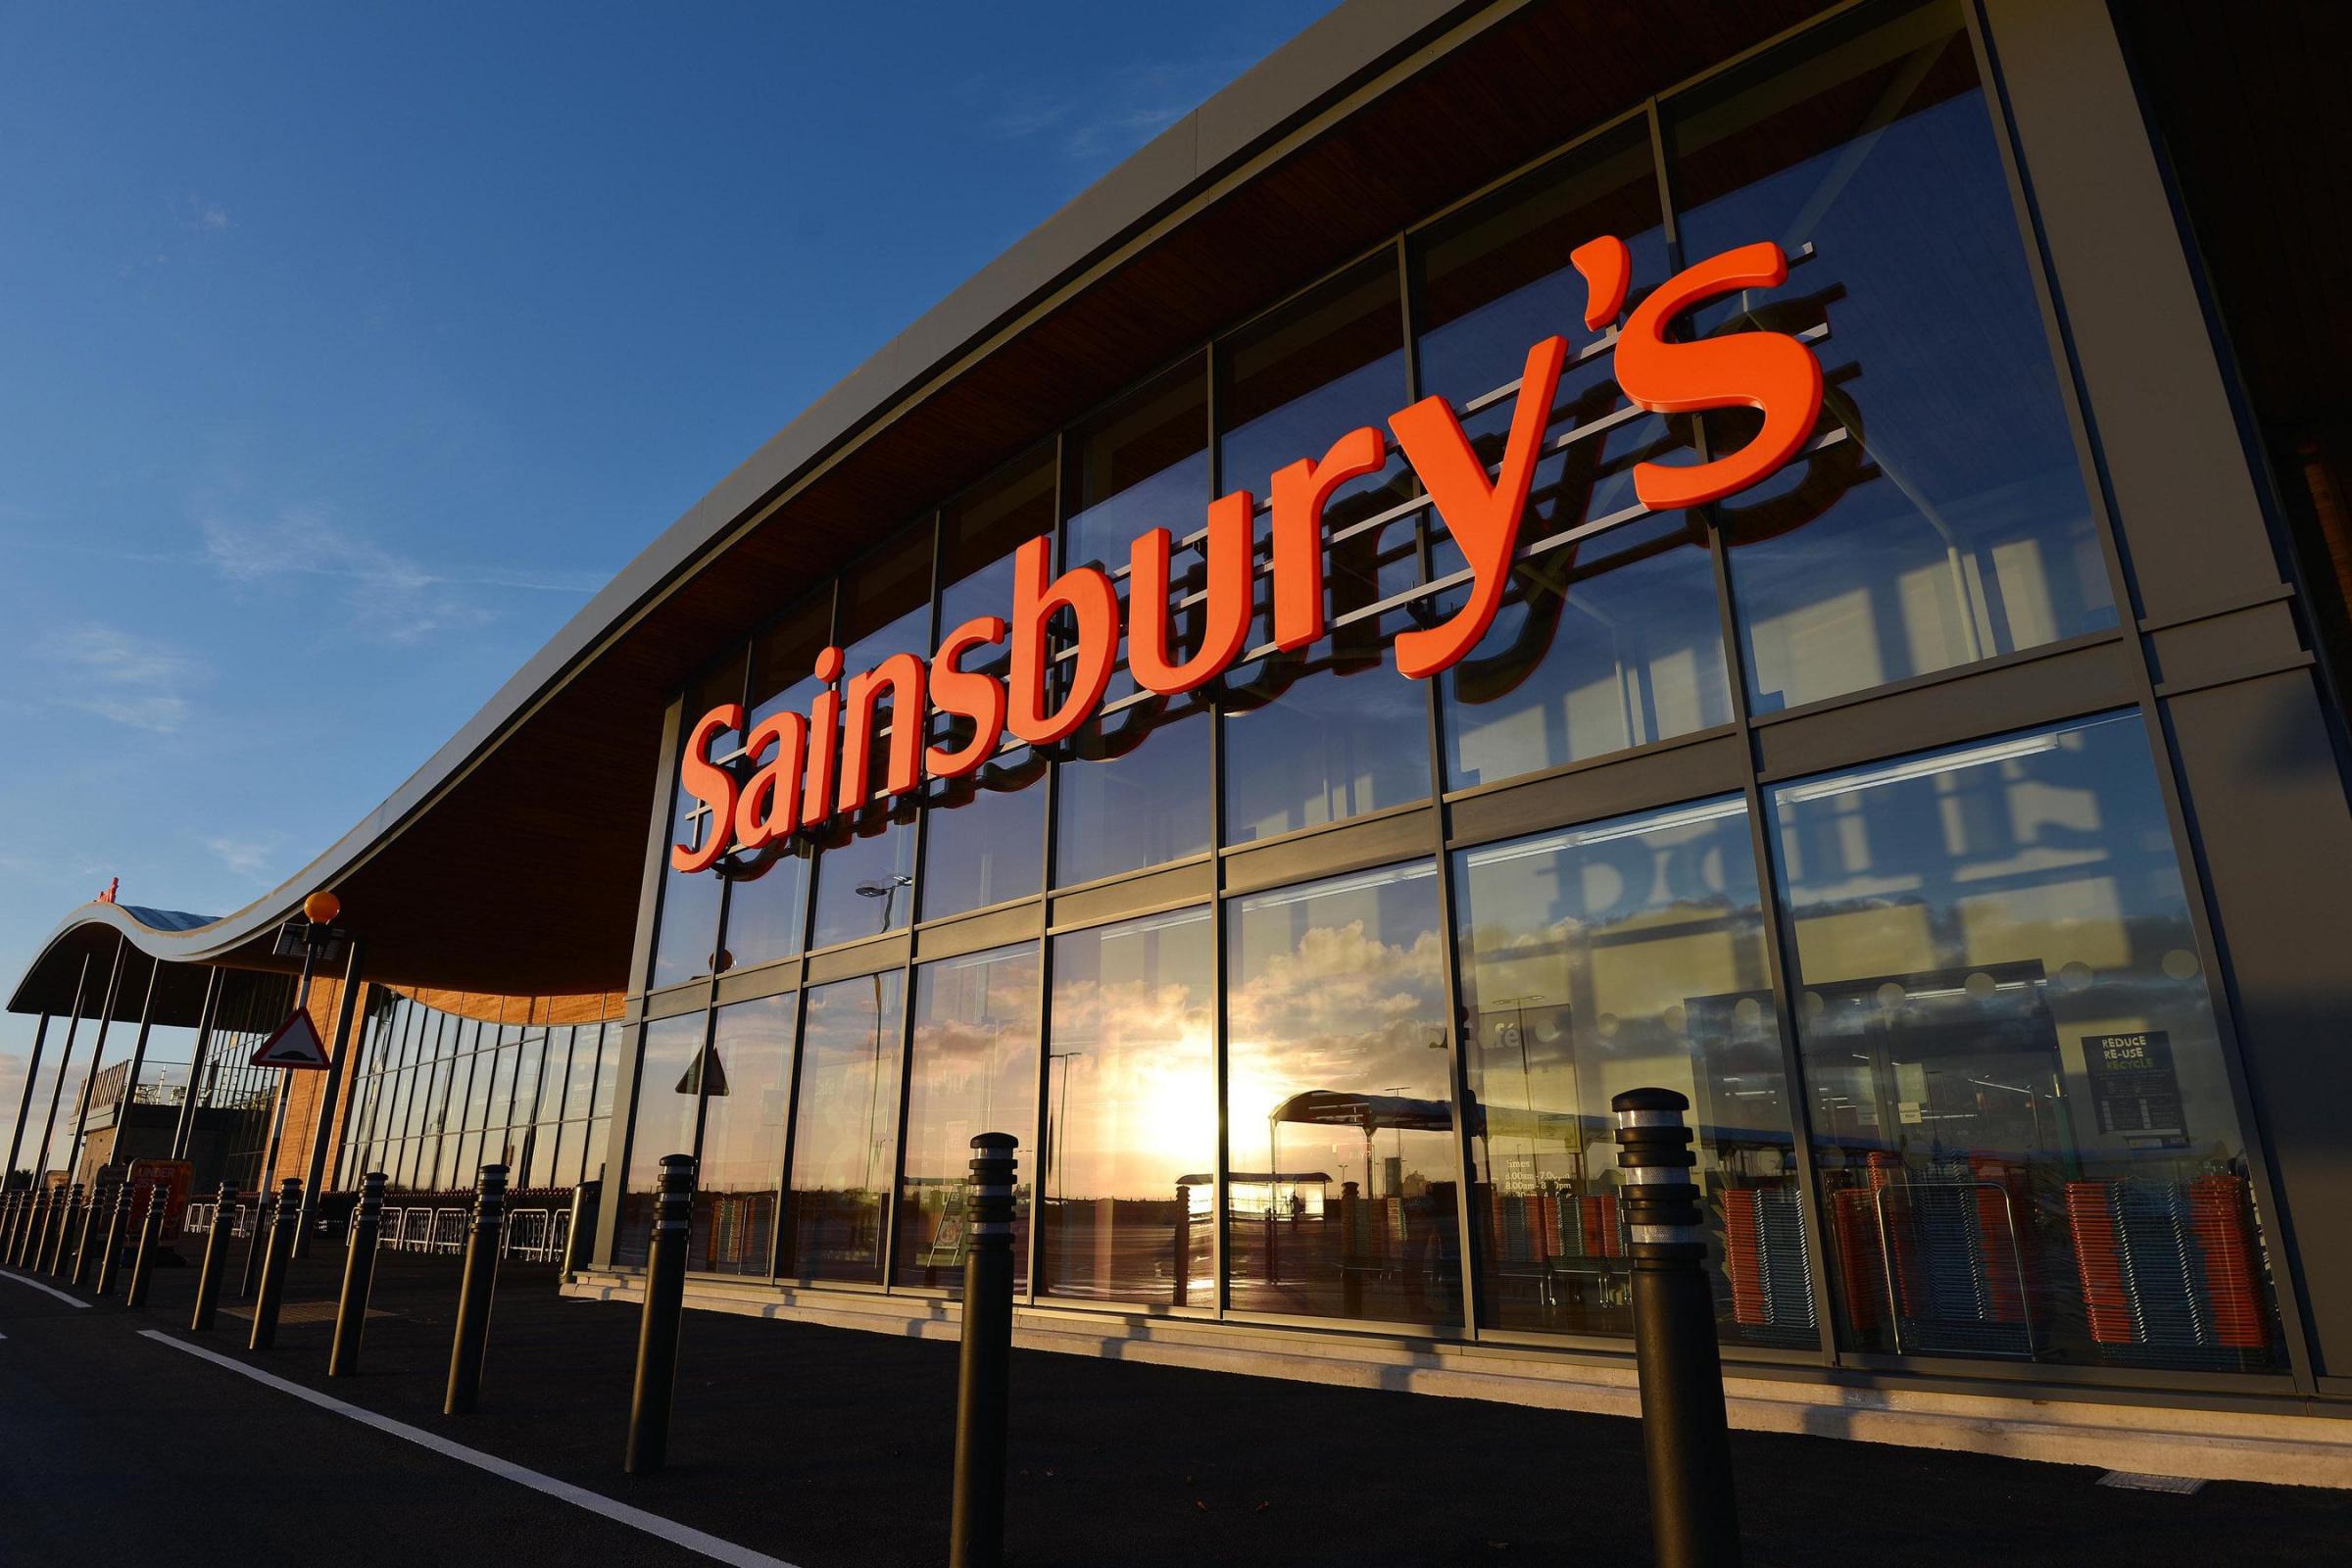 Sainsbury’s has more than 270 dairy farmers in the Sainsbury’s Dairy Development Group (SDDG) which was established in 2007